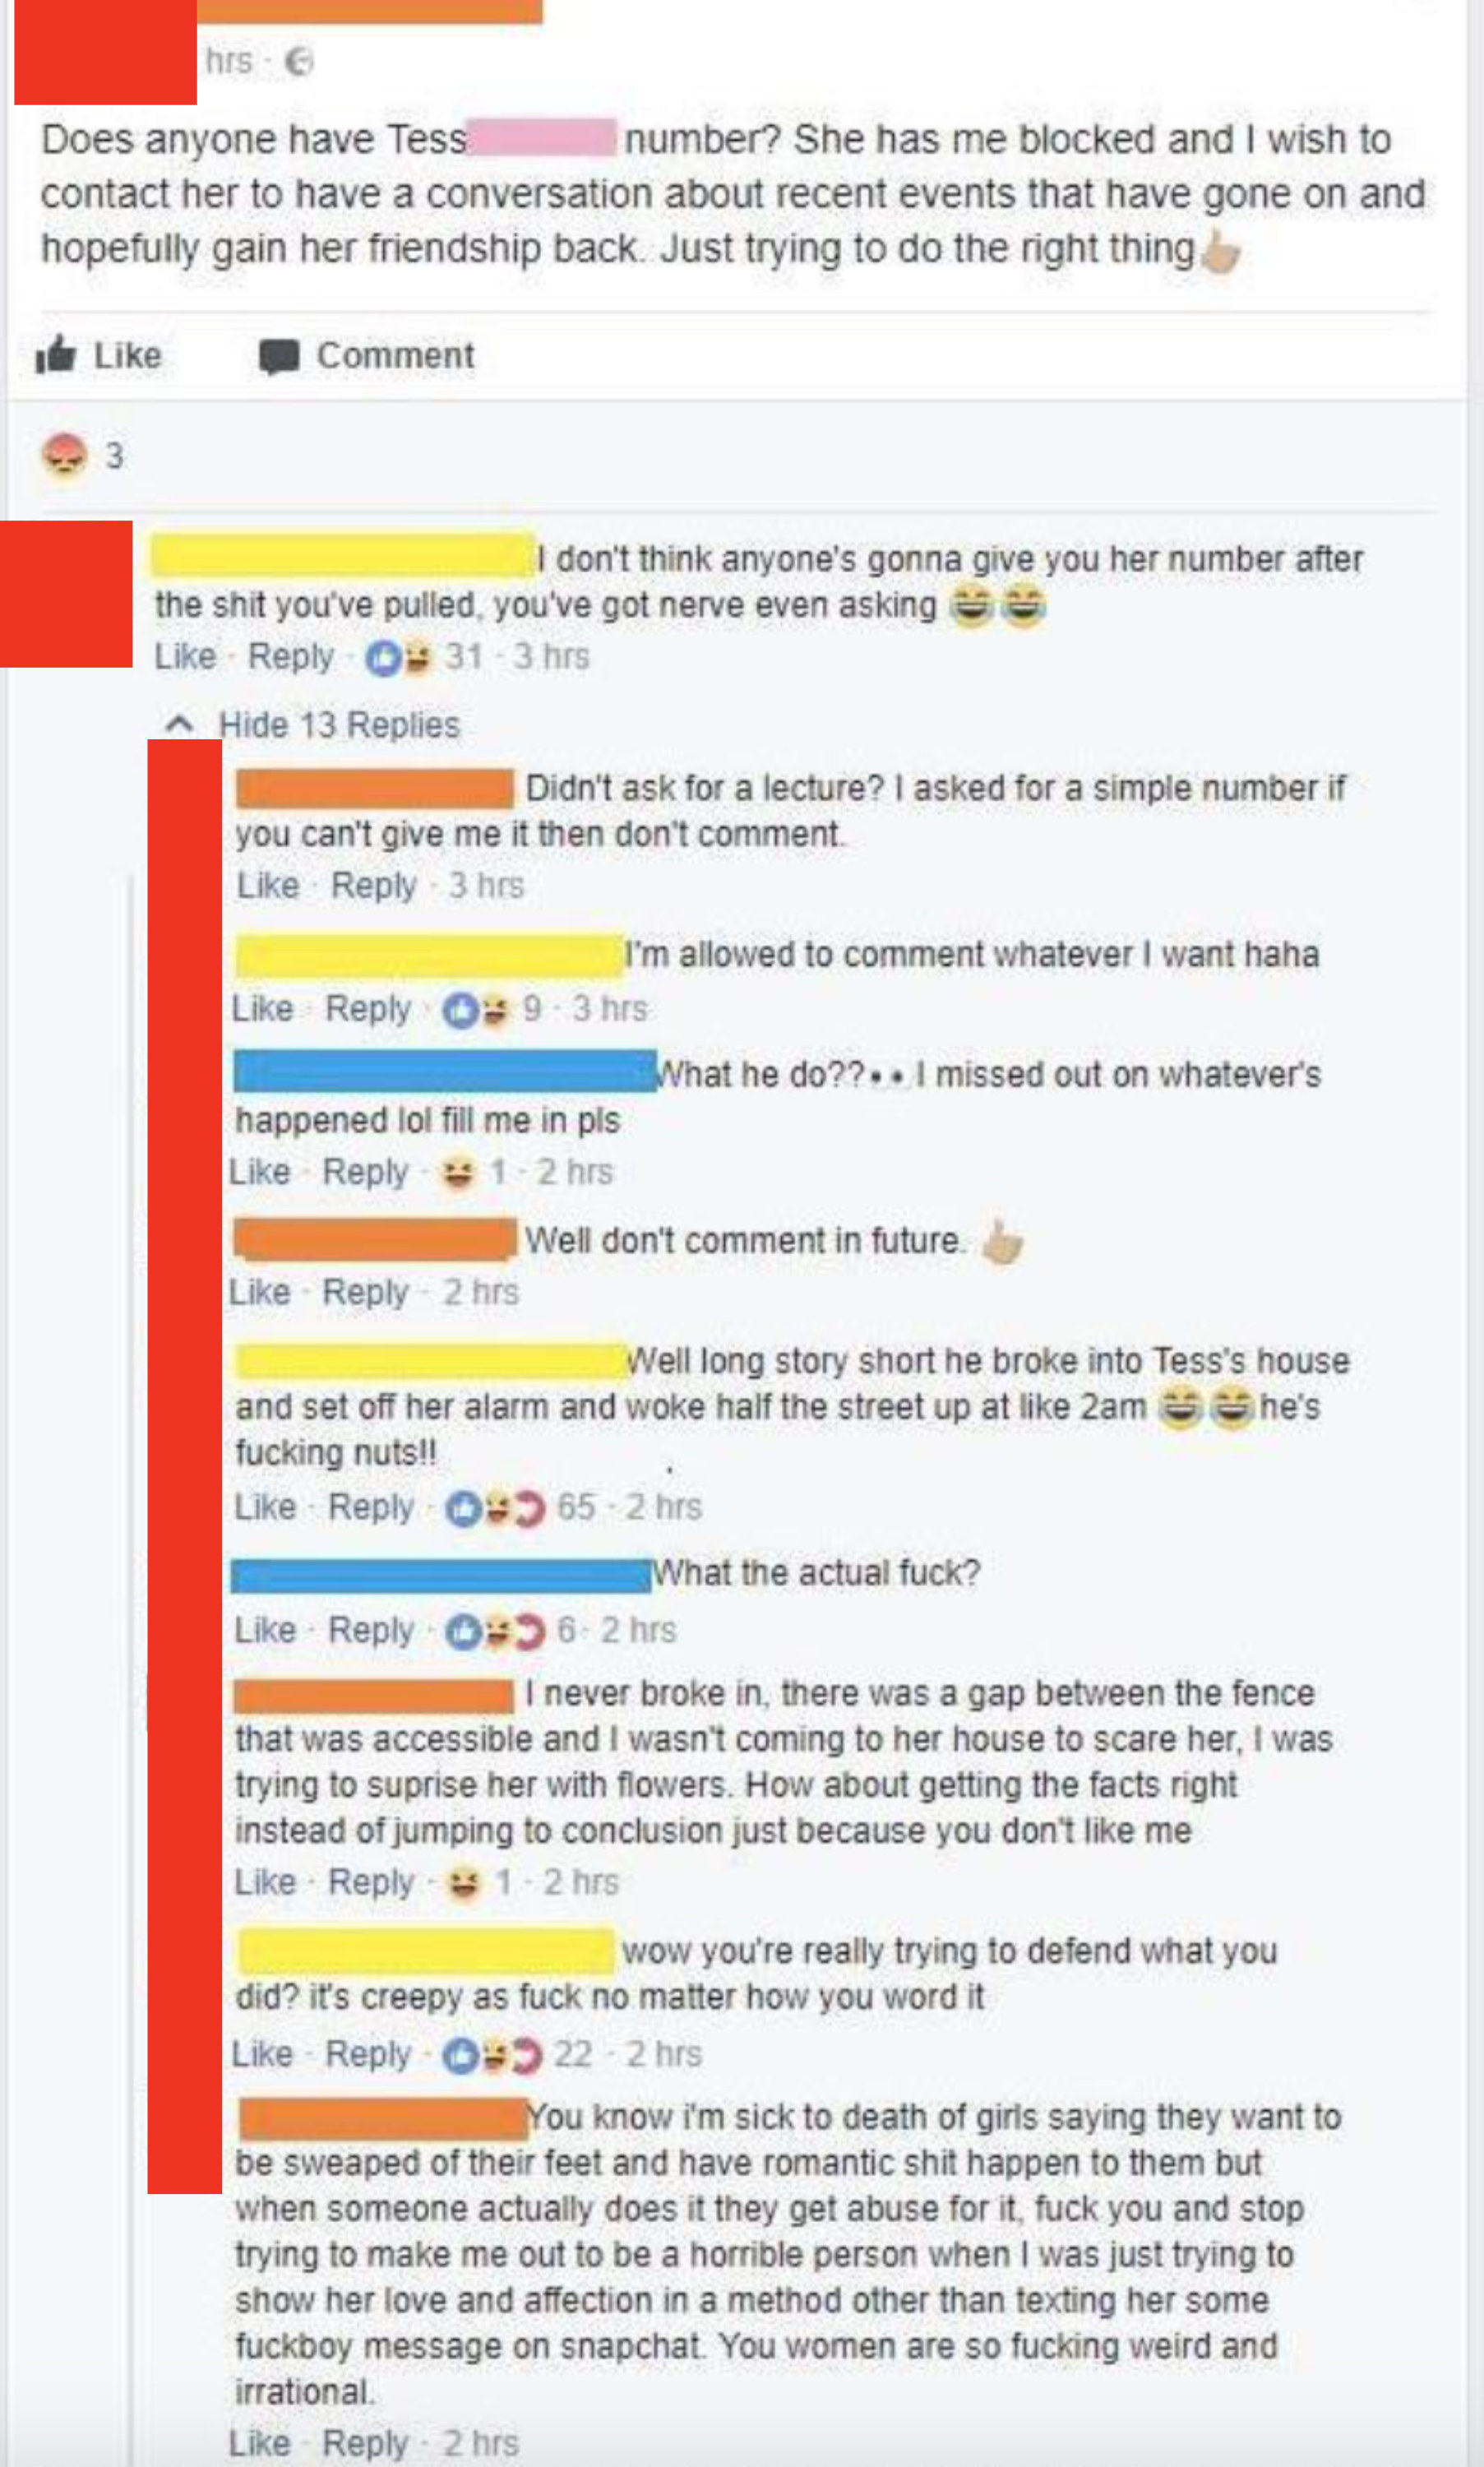 &quot;Nice guy:&quot; &quot;I&#x27;m sick to death of girls saying they want to be swept off their feet but when someone does it they get abused for it&quot;